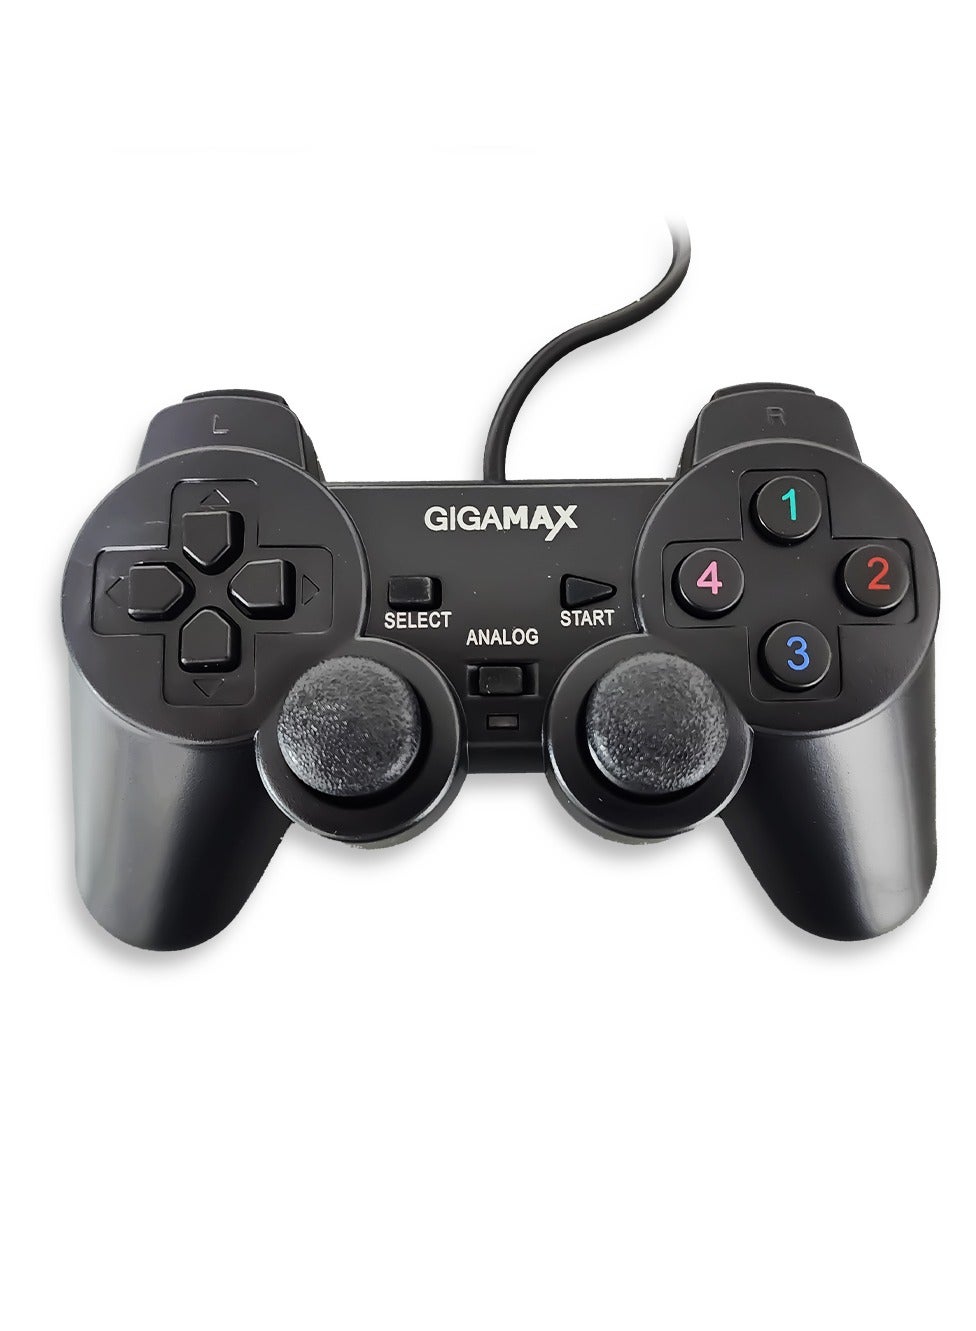 Gigamax Wired Gamepad for Desktop PC and Laptops, Black - GM4040